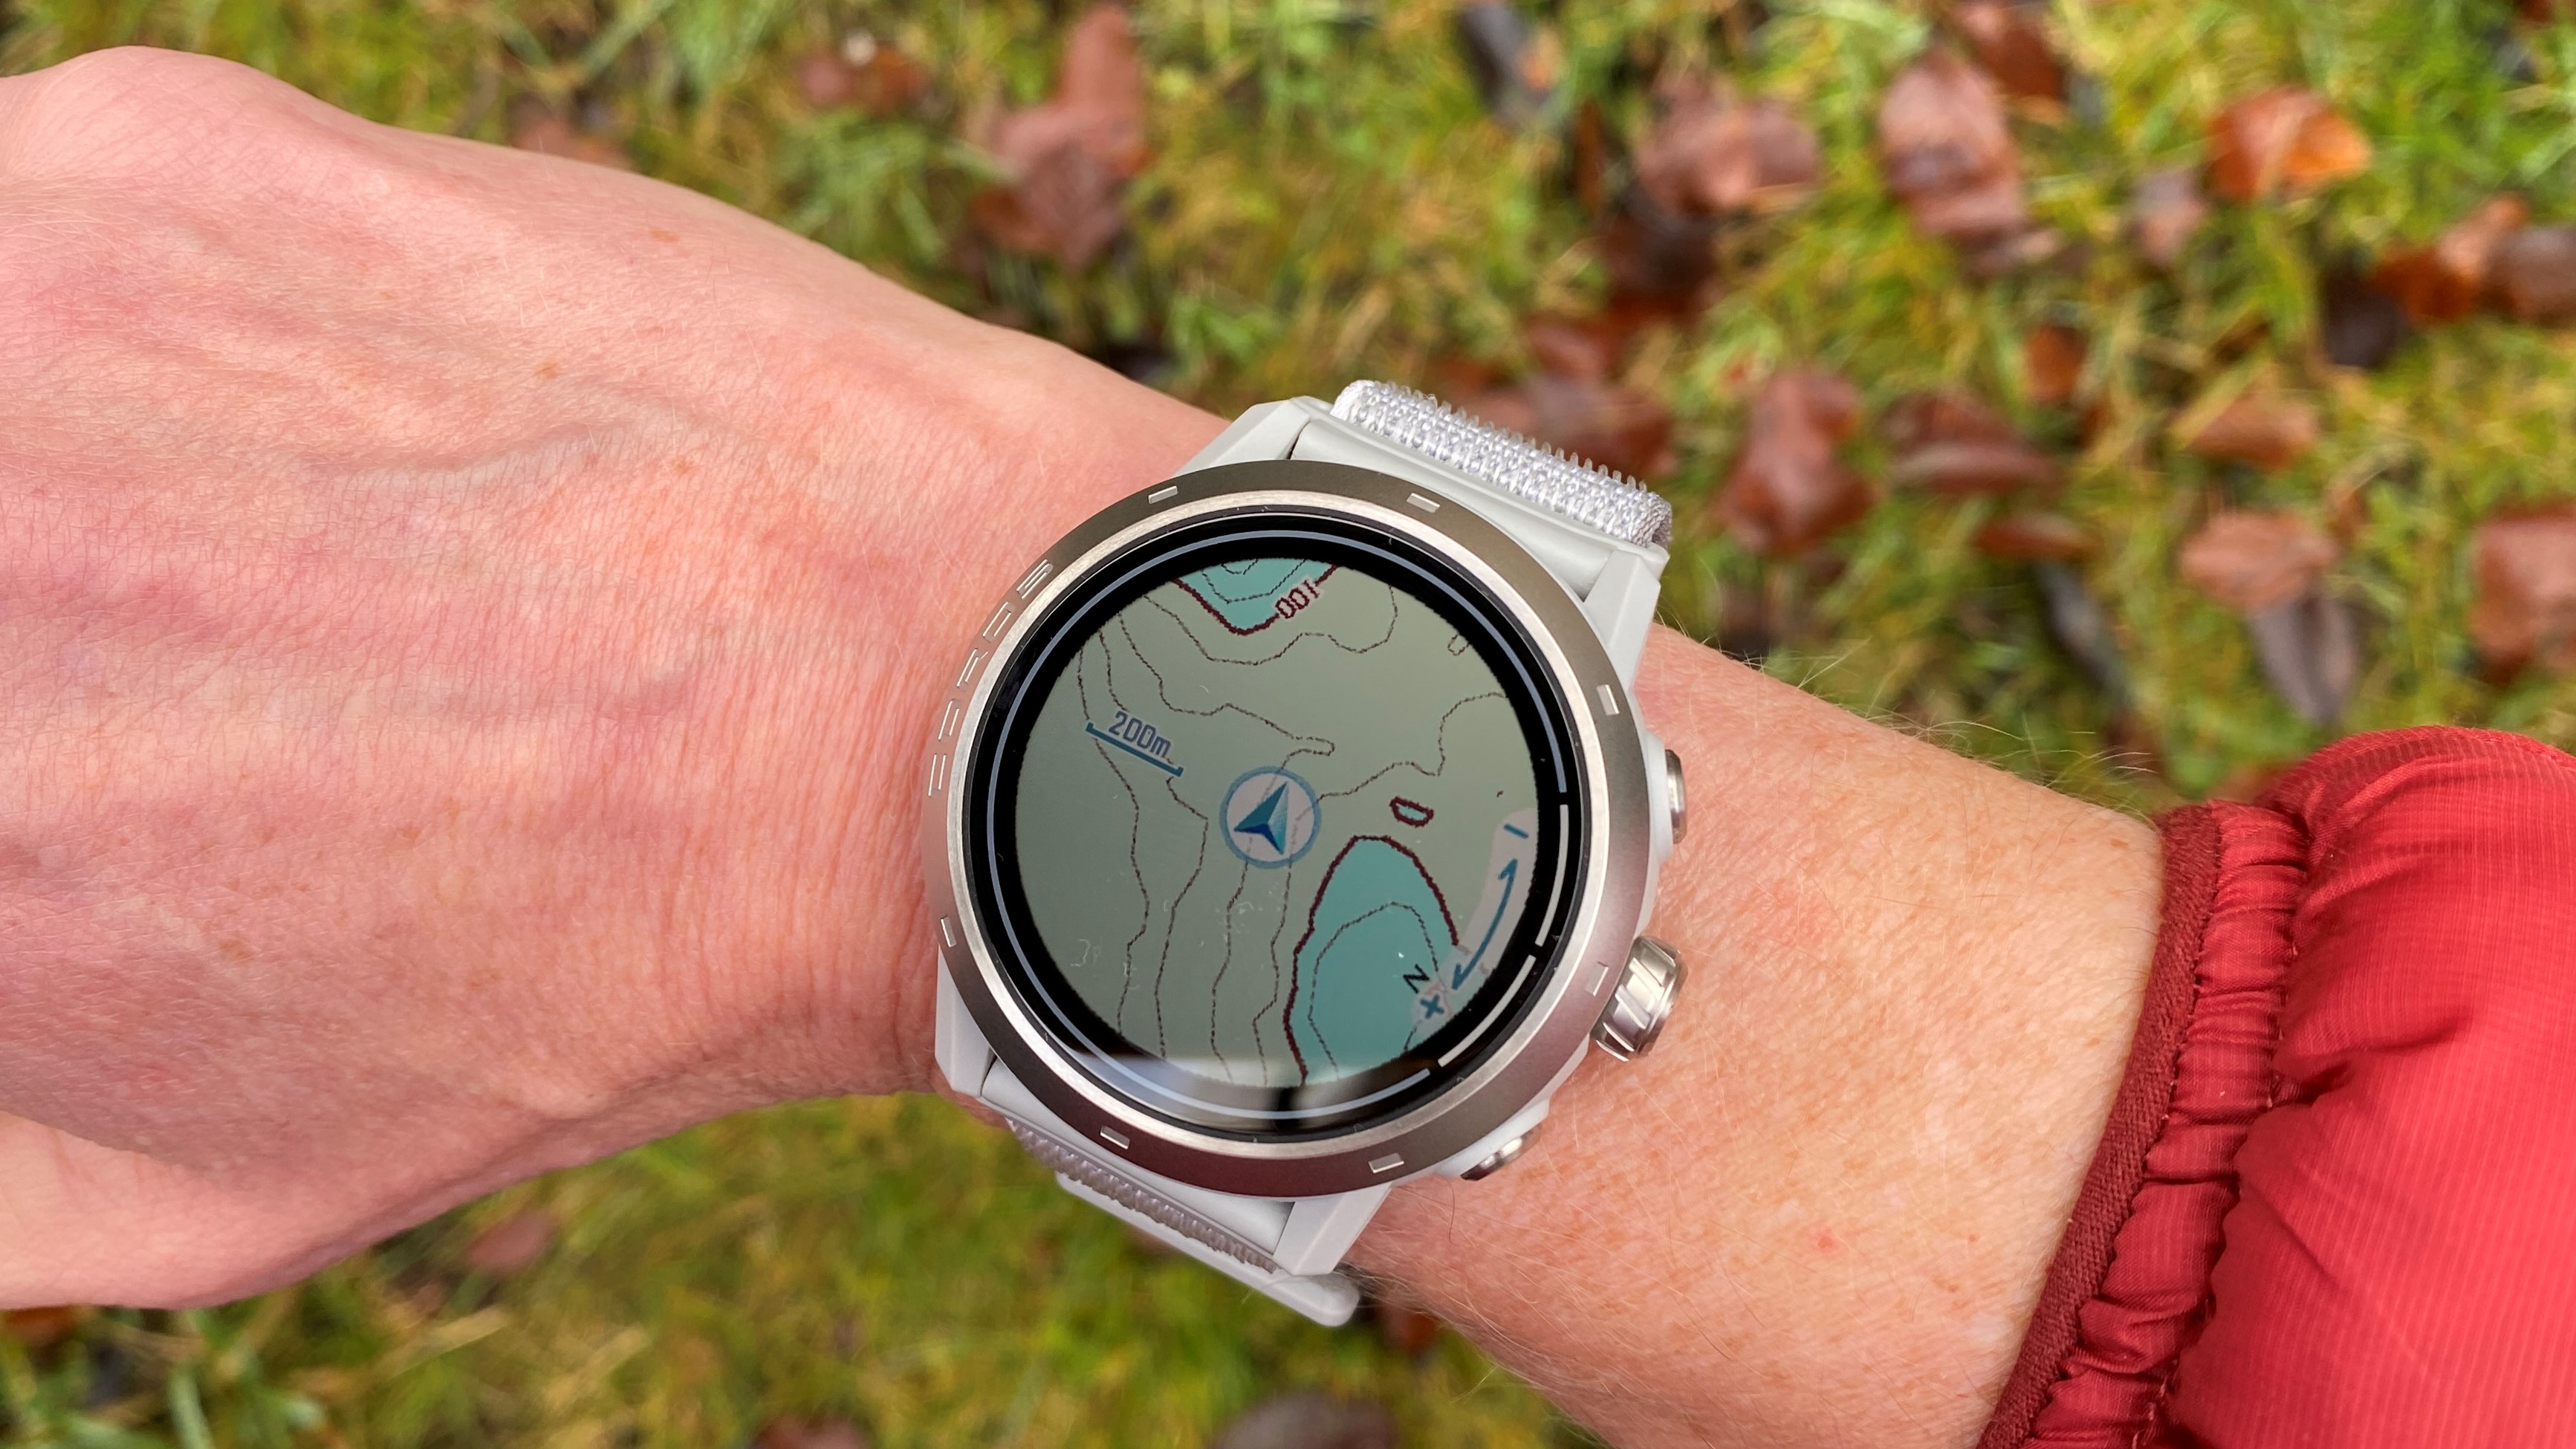 COROS APEX 2 Pro Review: This Sports Watch Sets Benchmark for Battery Life